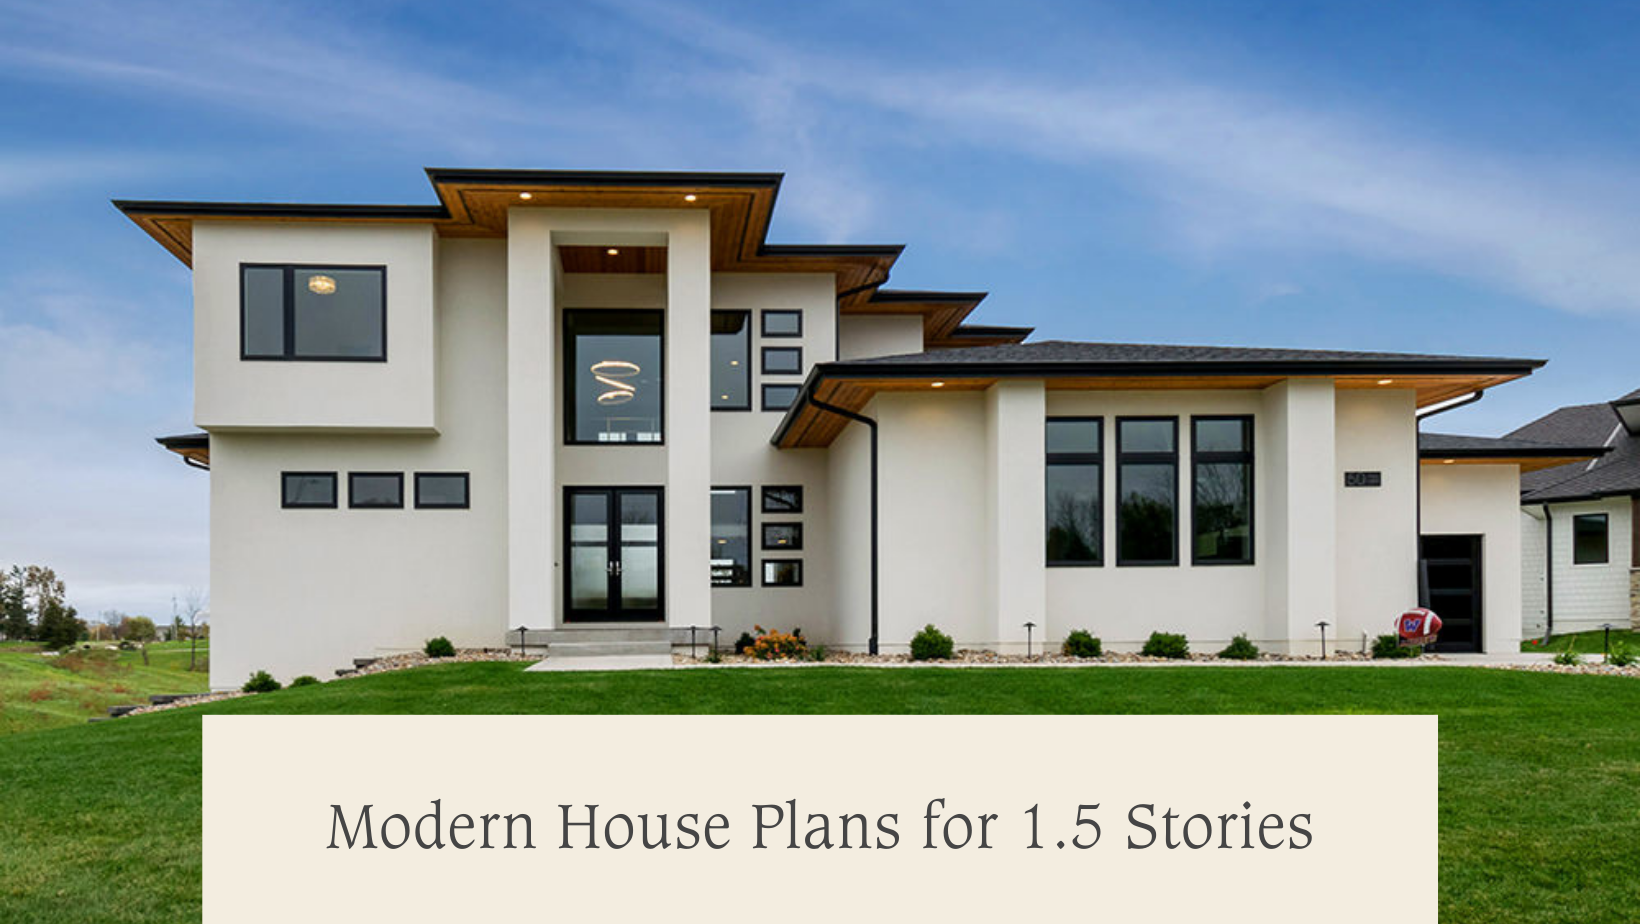 Modern House Plans for 1.5 Stories